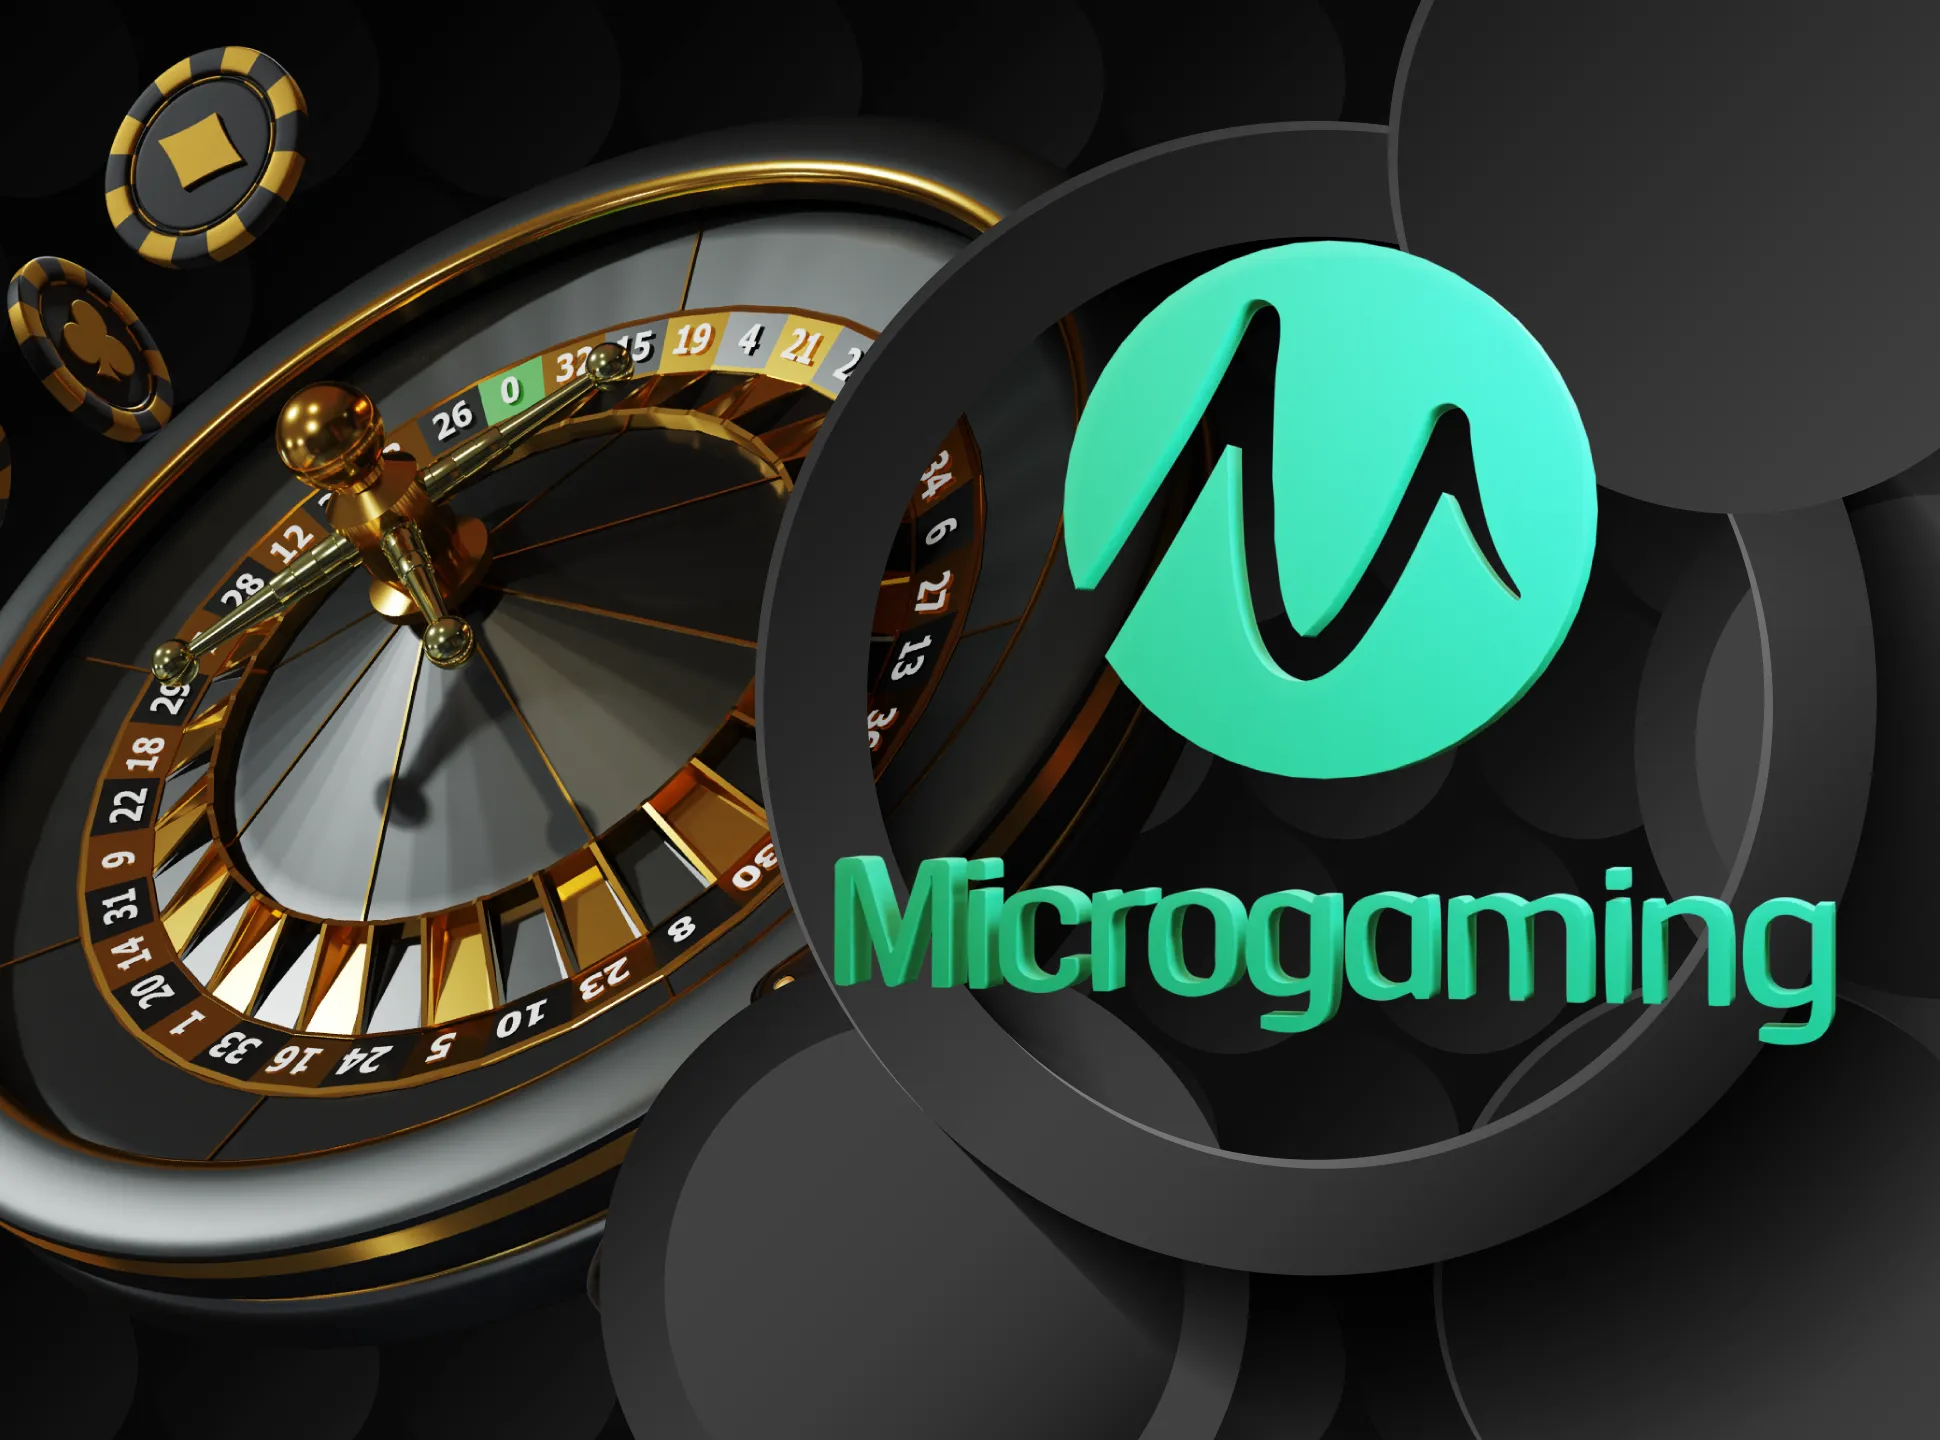 Microgaming is one of the most well-known game providers.